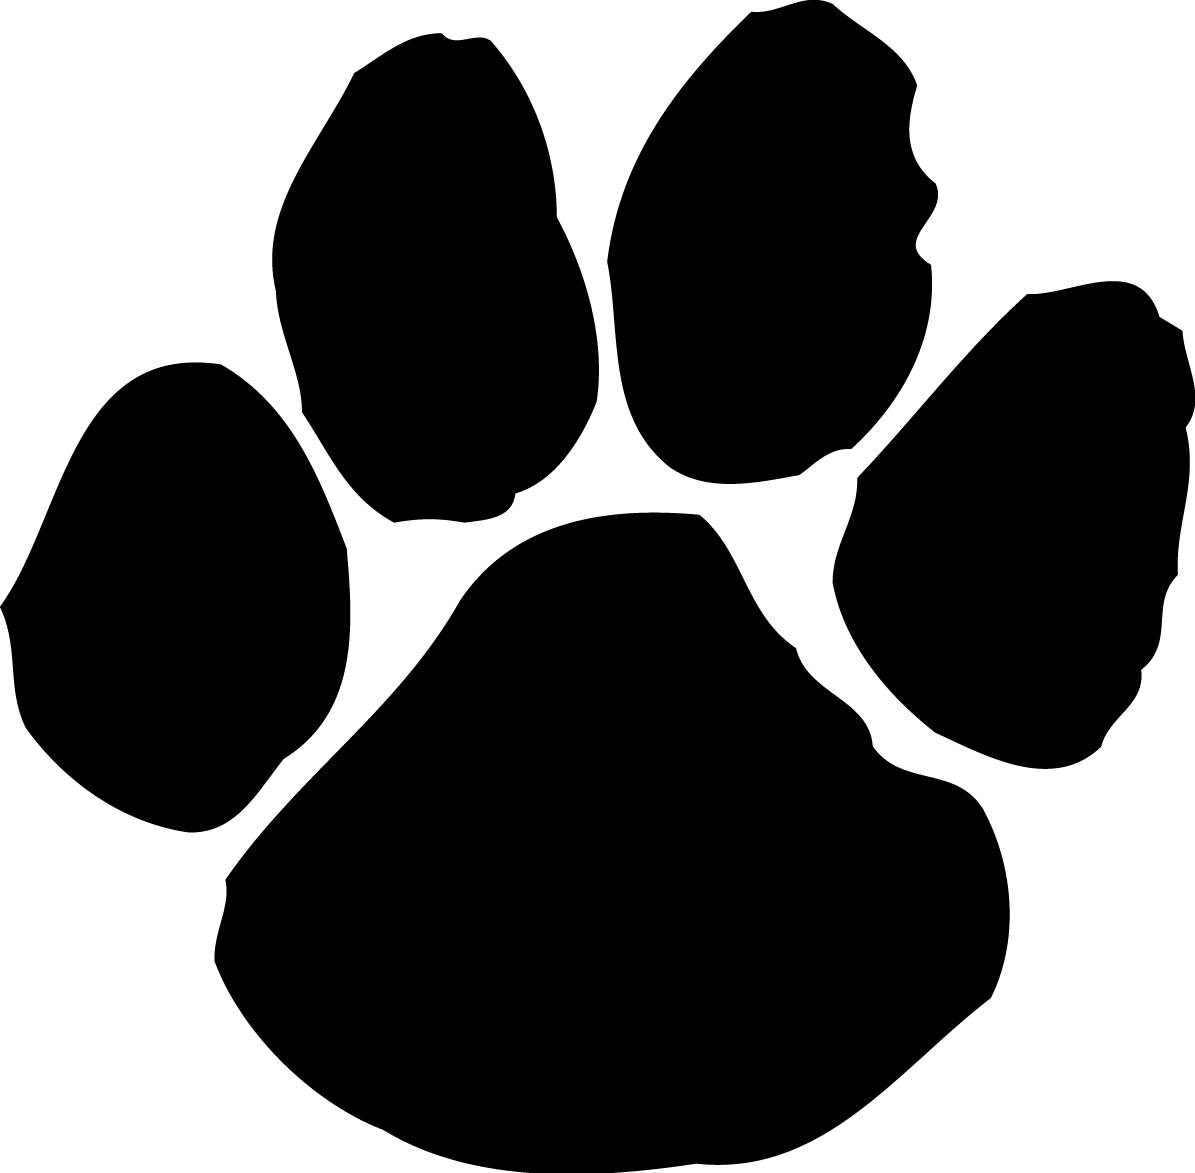 Clip Art Dog Paw Print - Clipart library